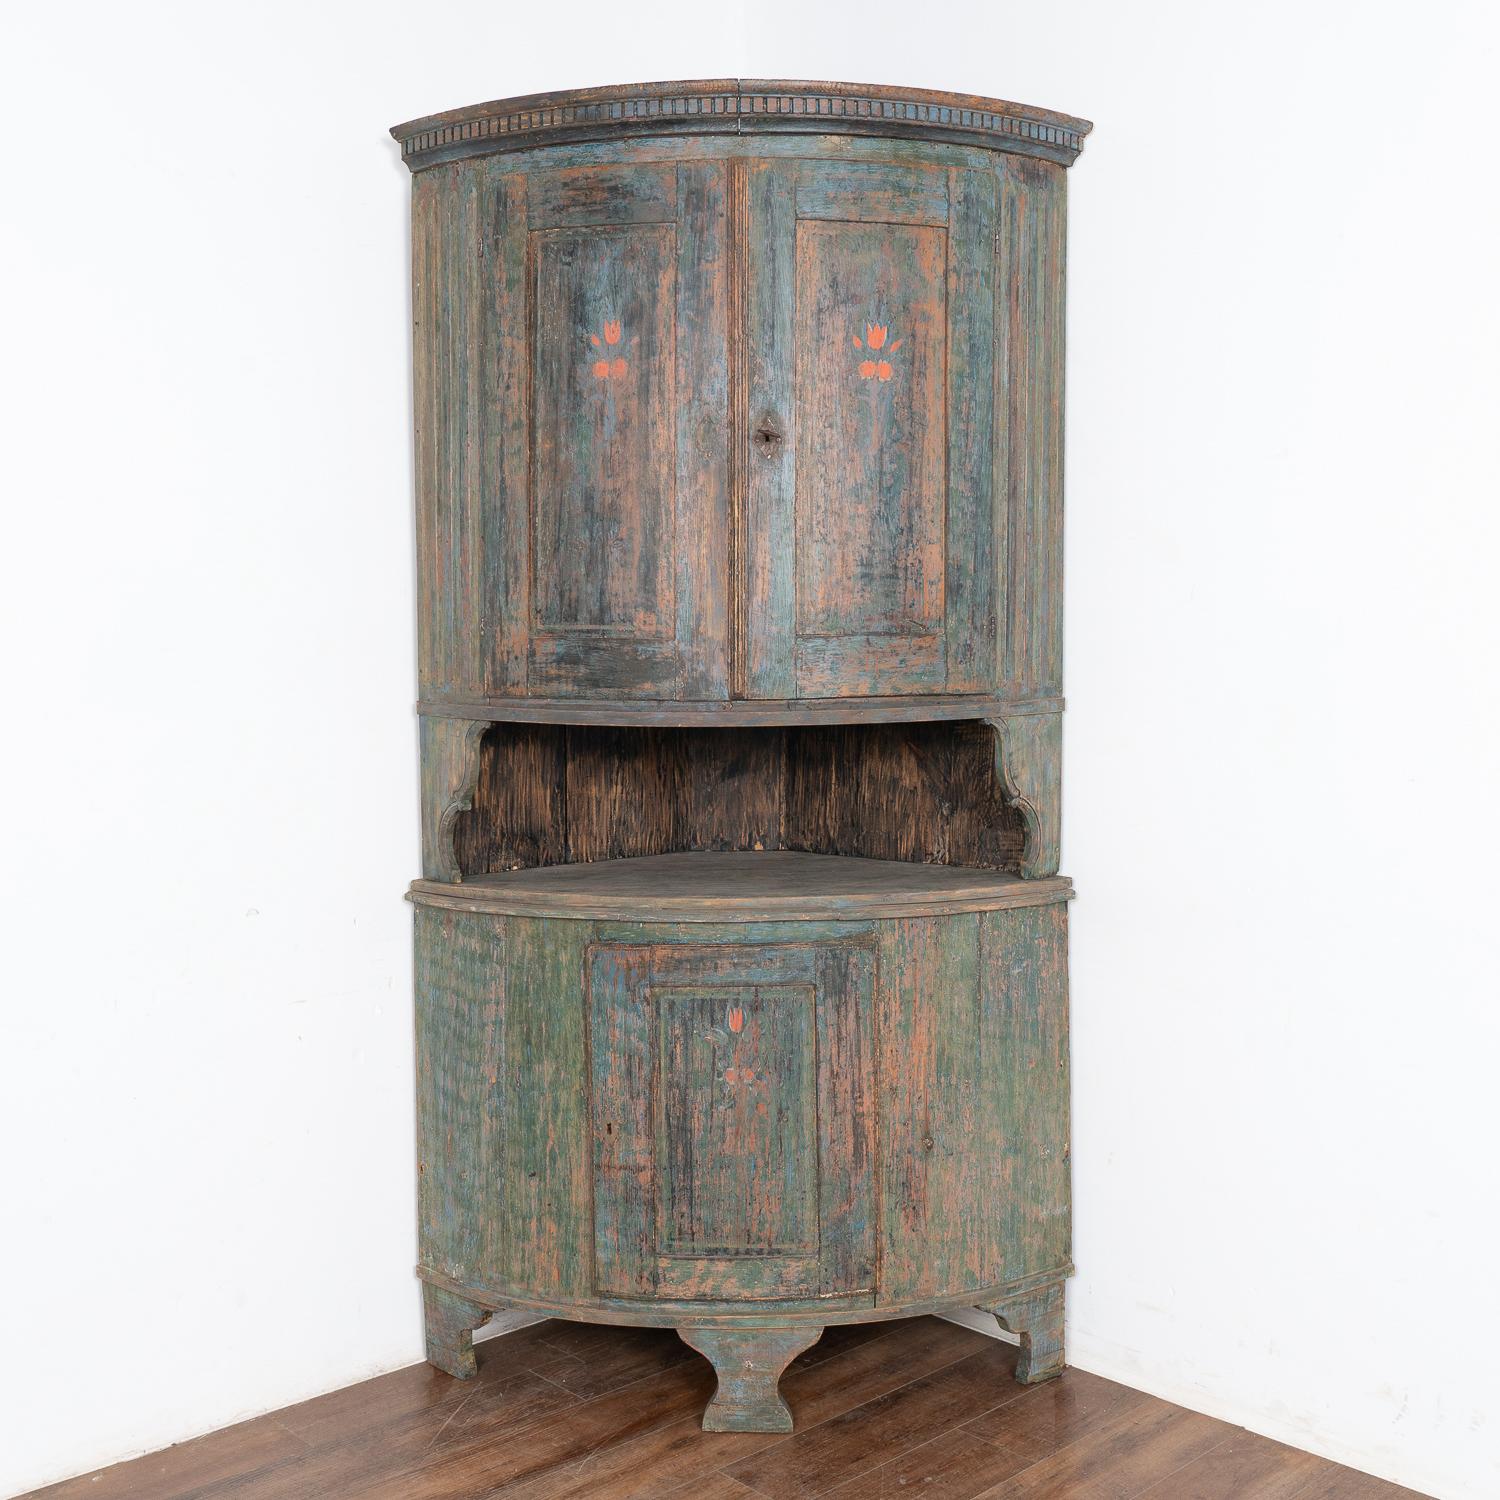 This tall bow front pine corner cabinet still maintains its original hand-painted finish with simple floral details remaining along the panels and topped with traditional dentil molding.
The original blue/green/teal painted finish has a soft, worn